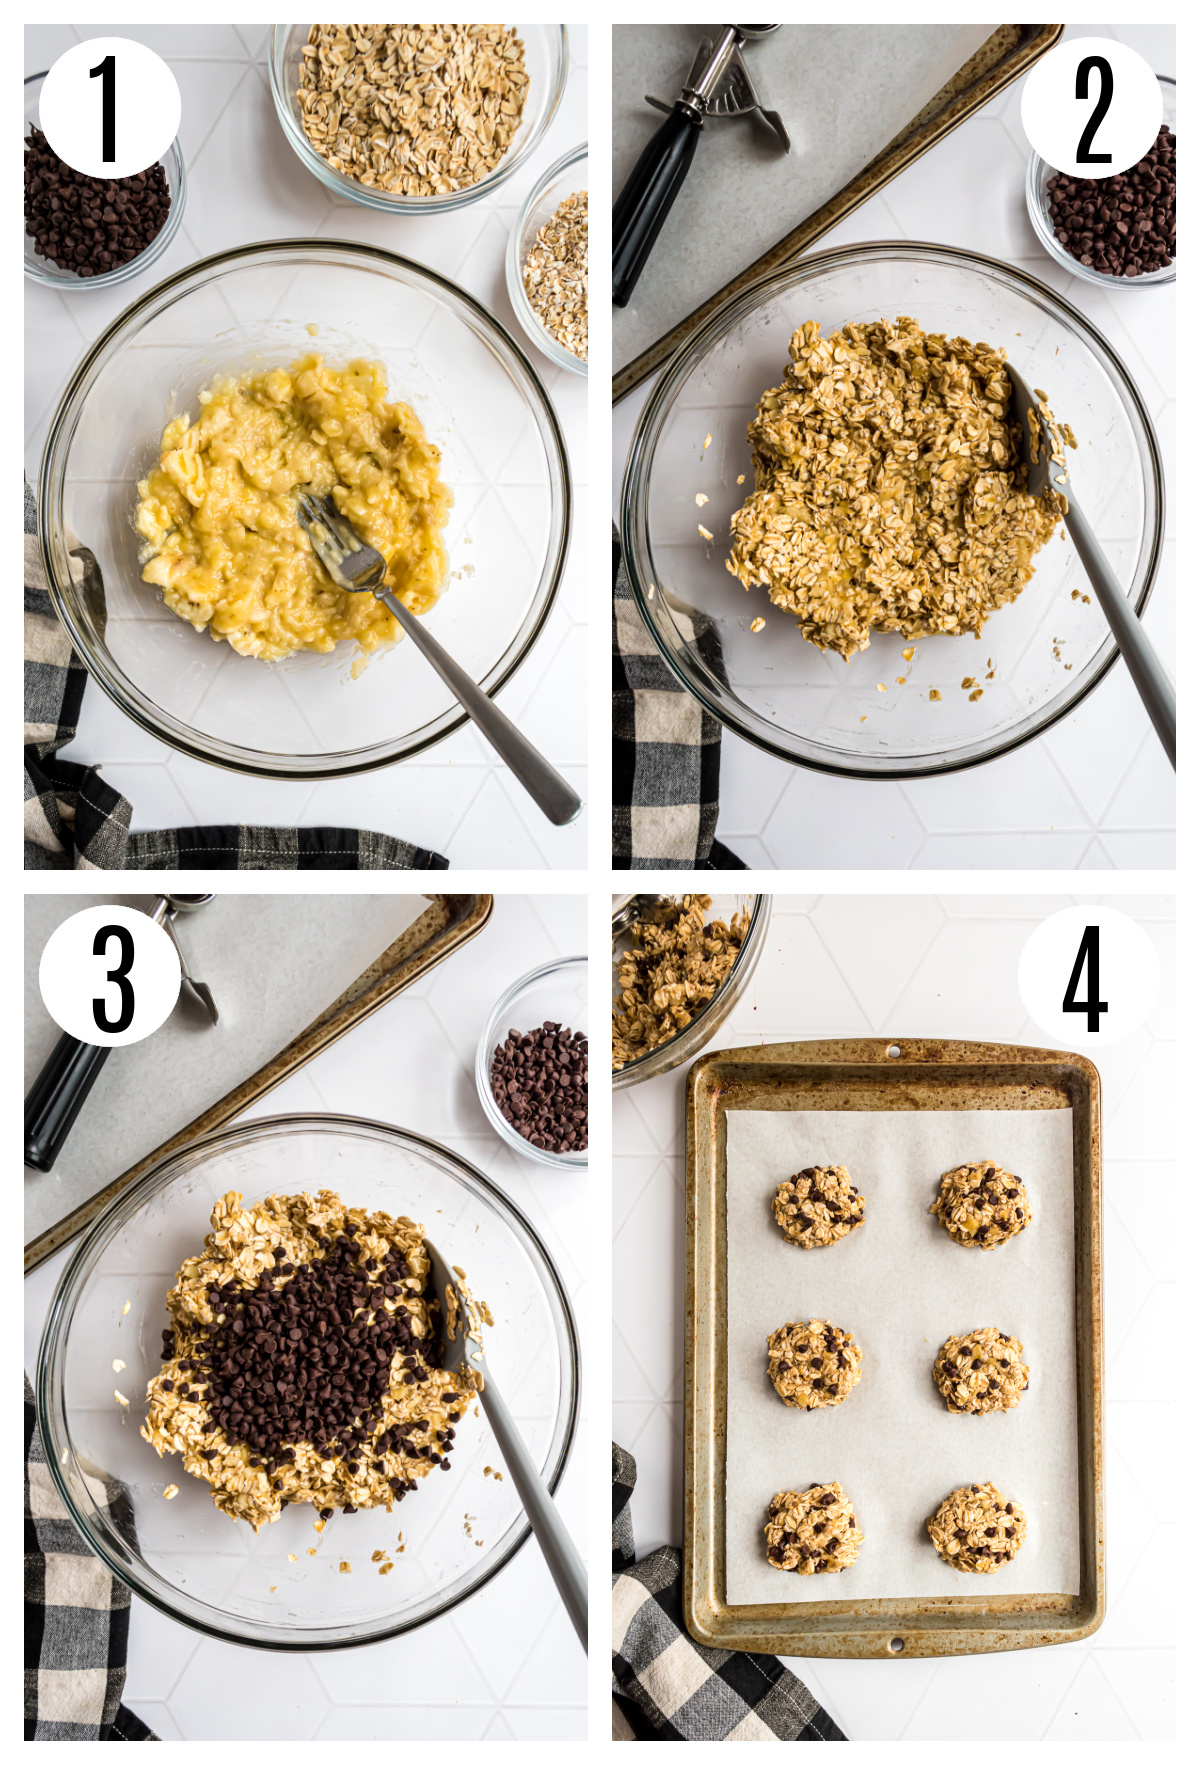 The steps to make the 3-ingredient banana  cookies include mashing the banana, stirring in the oats, folding in the chocolate chips and baking the cookies.